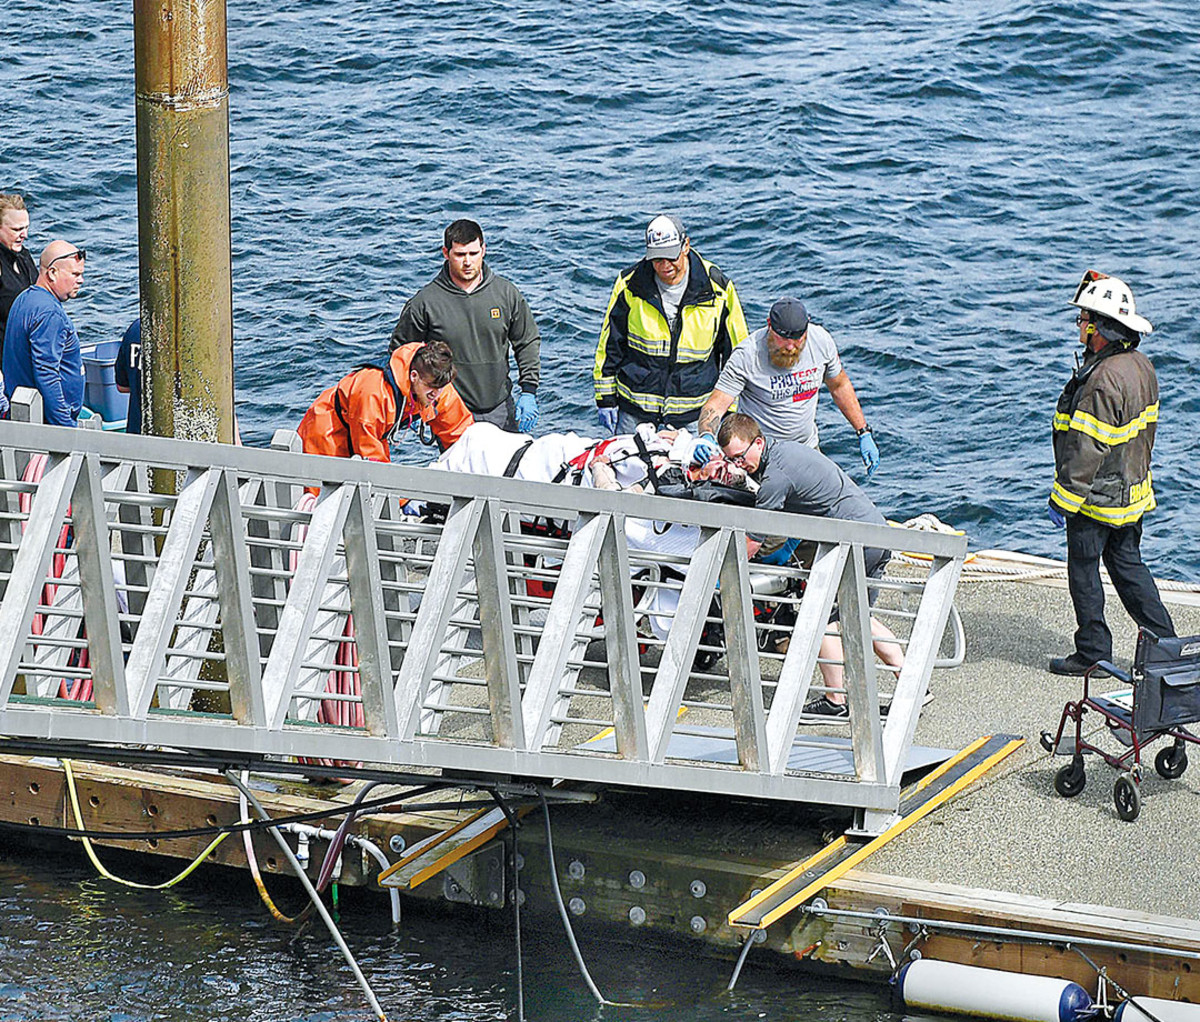 Emergency workers transport an injured person after the midair crash in May.